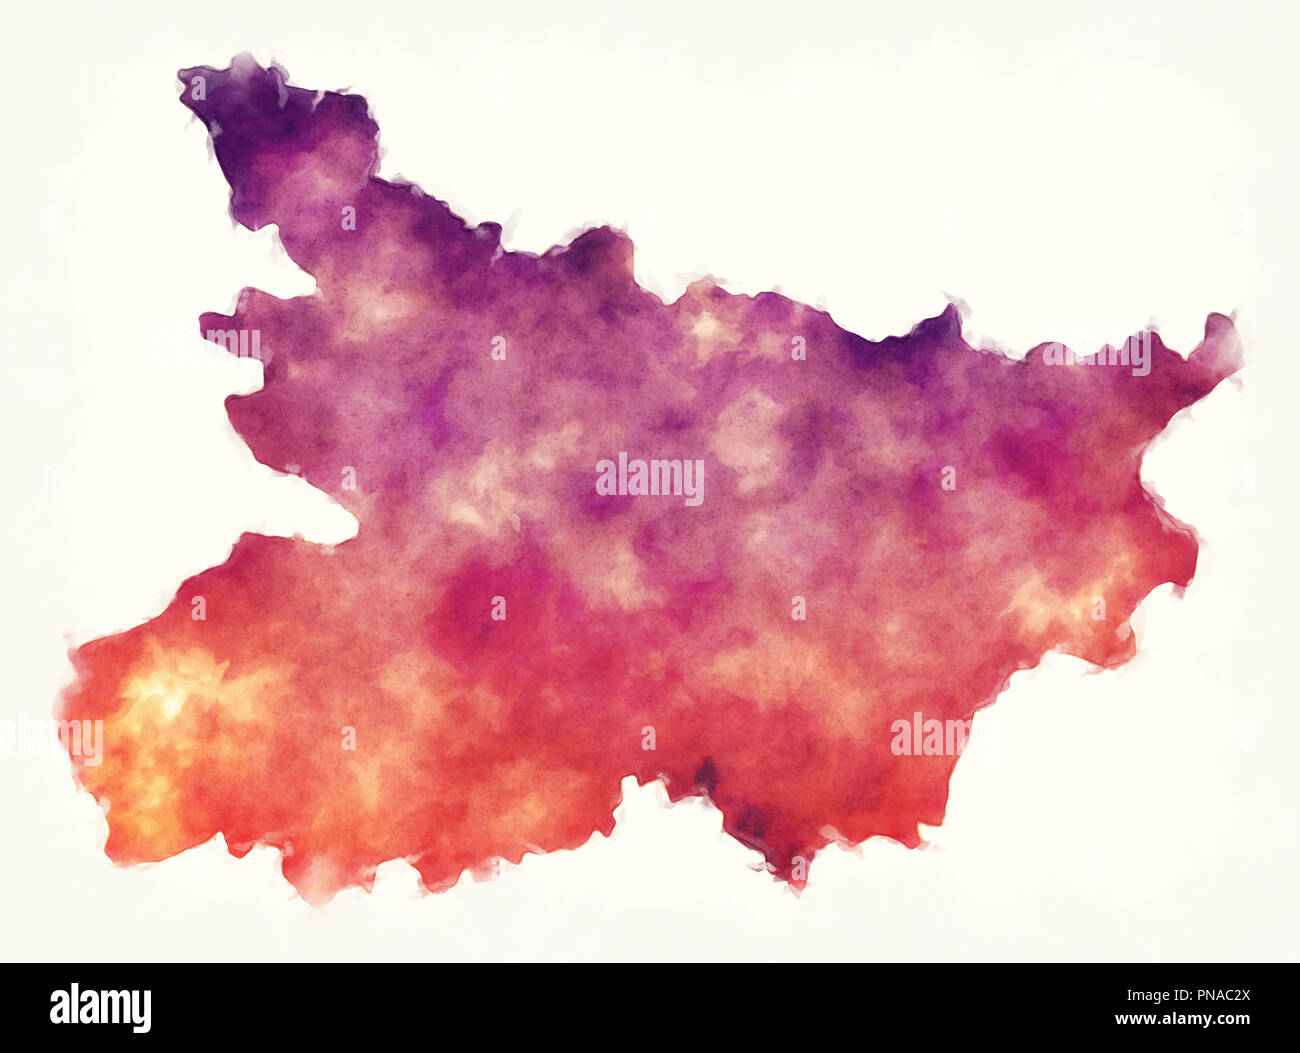 Bihar federal state watercolor map of India in front of a white background Stock Photo